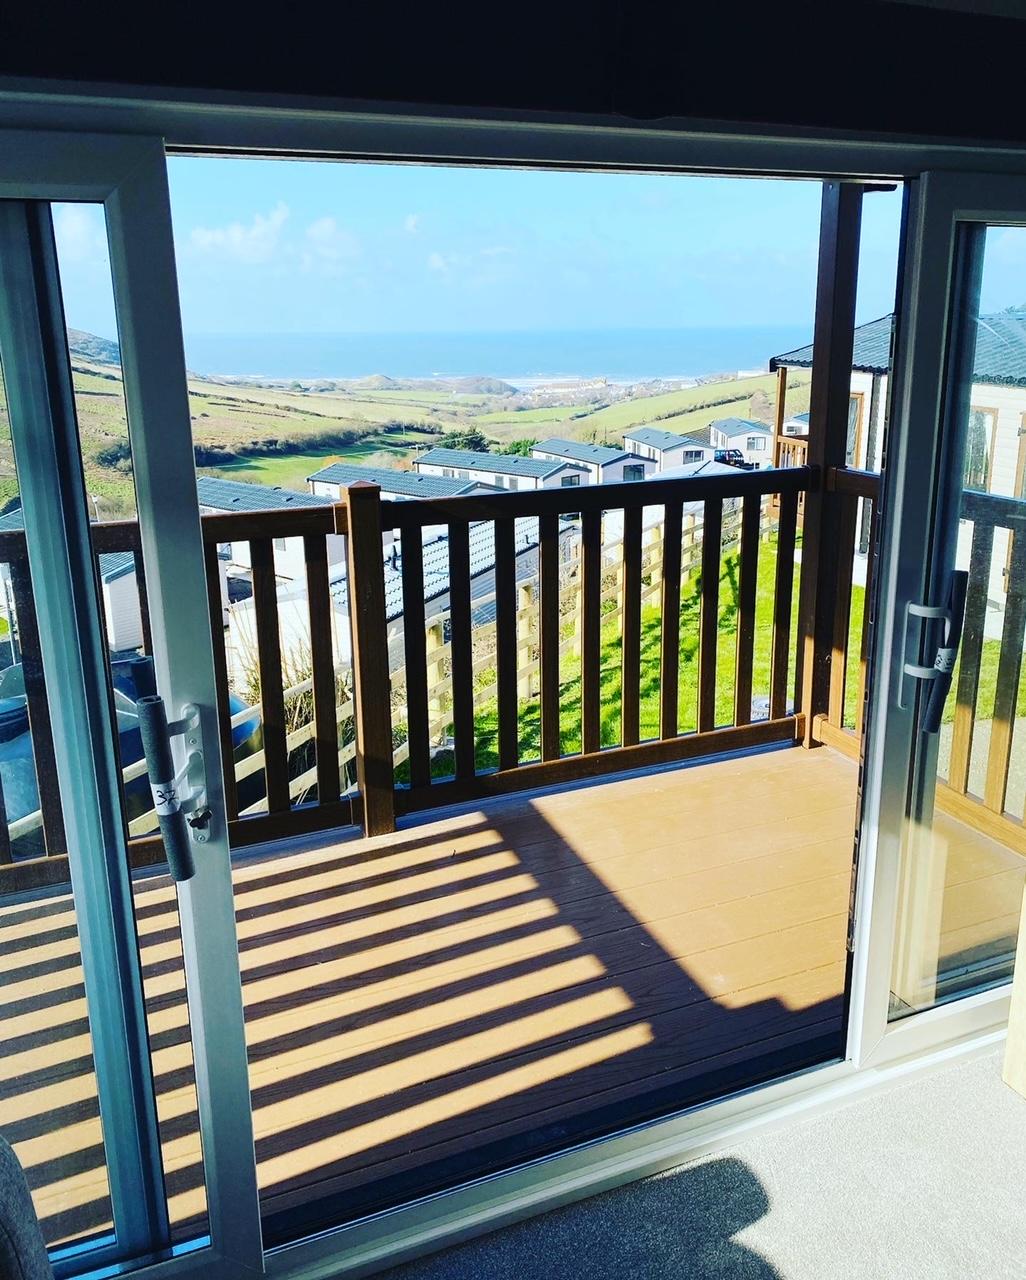 Stunning sea views from the Ocean View Platinums at Woolacombe Sands